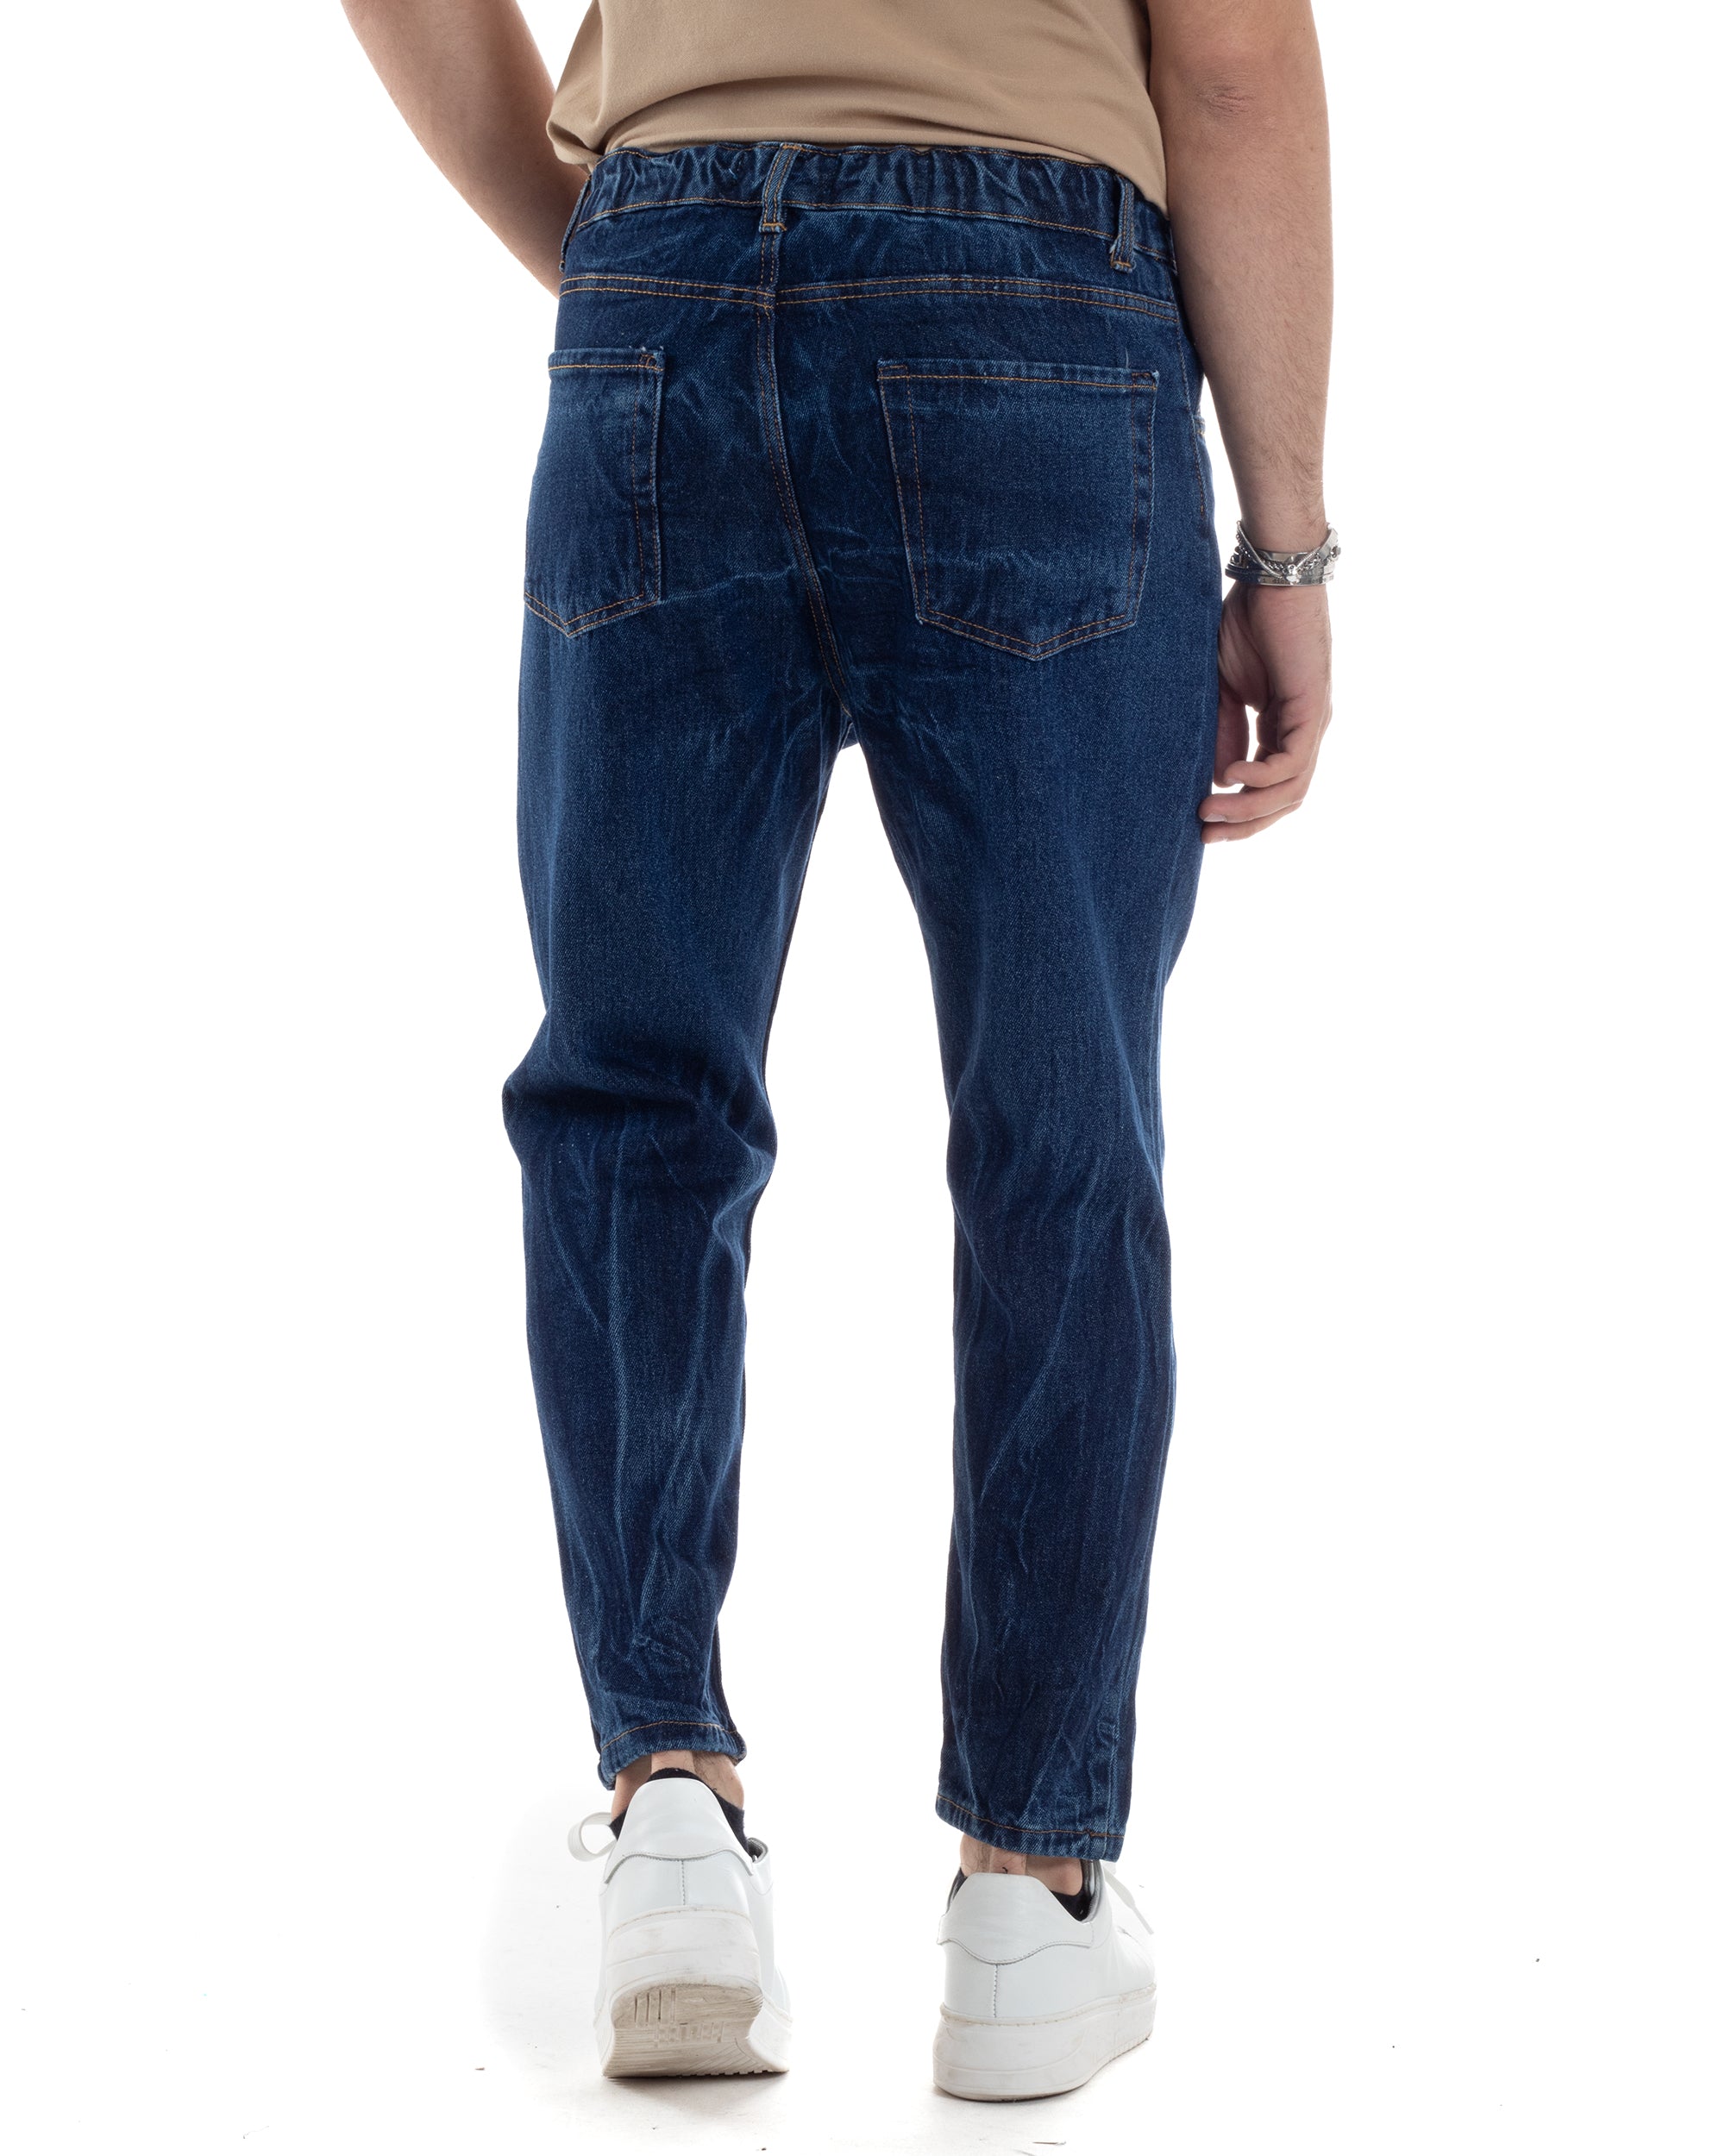 Men's Jeans Trousers Loose Fit Dark Denim With Rips Five Pockets GIOSAL-P5556A